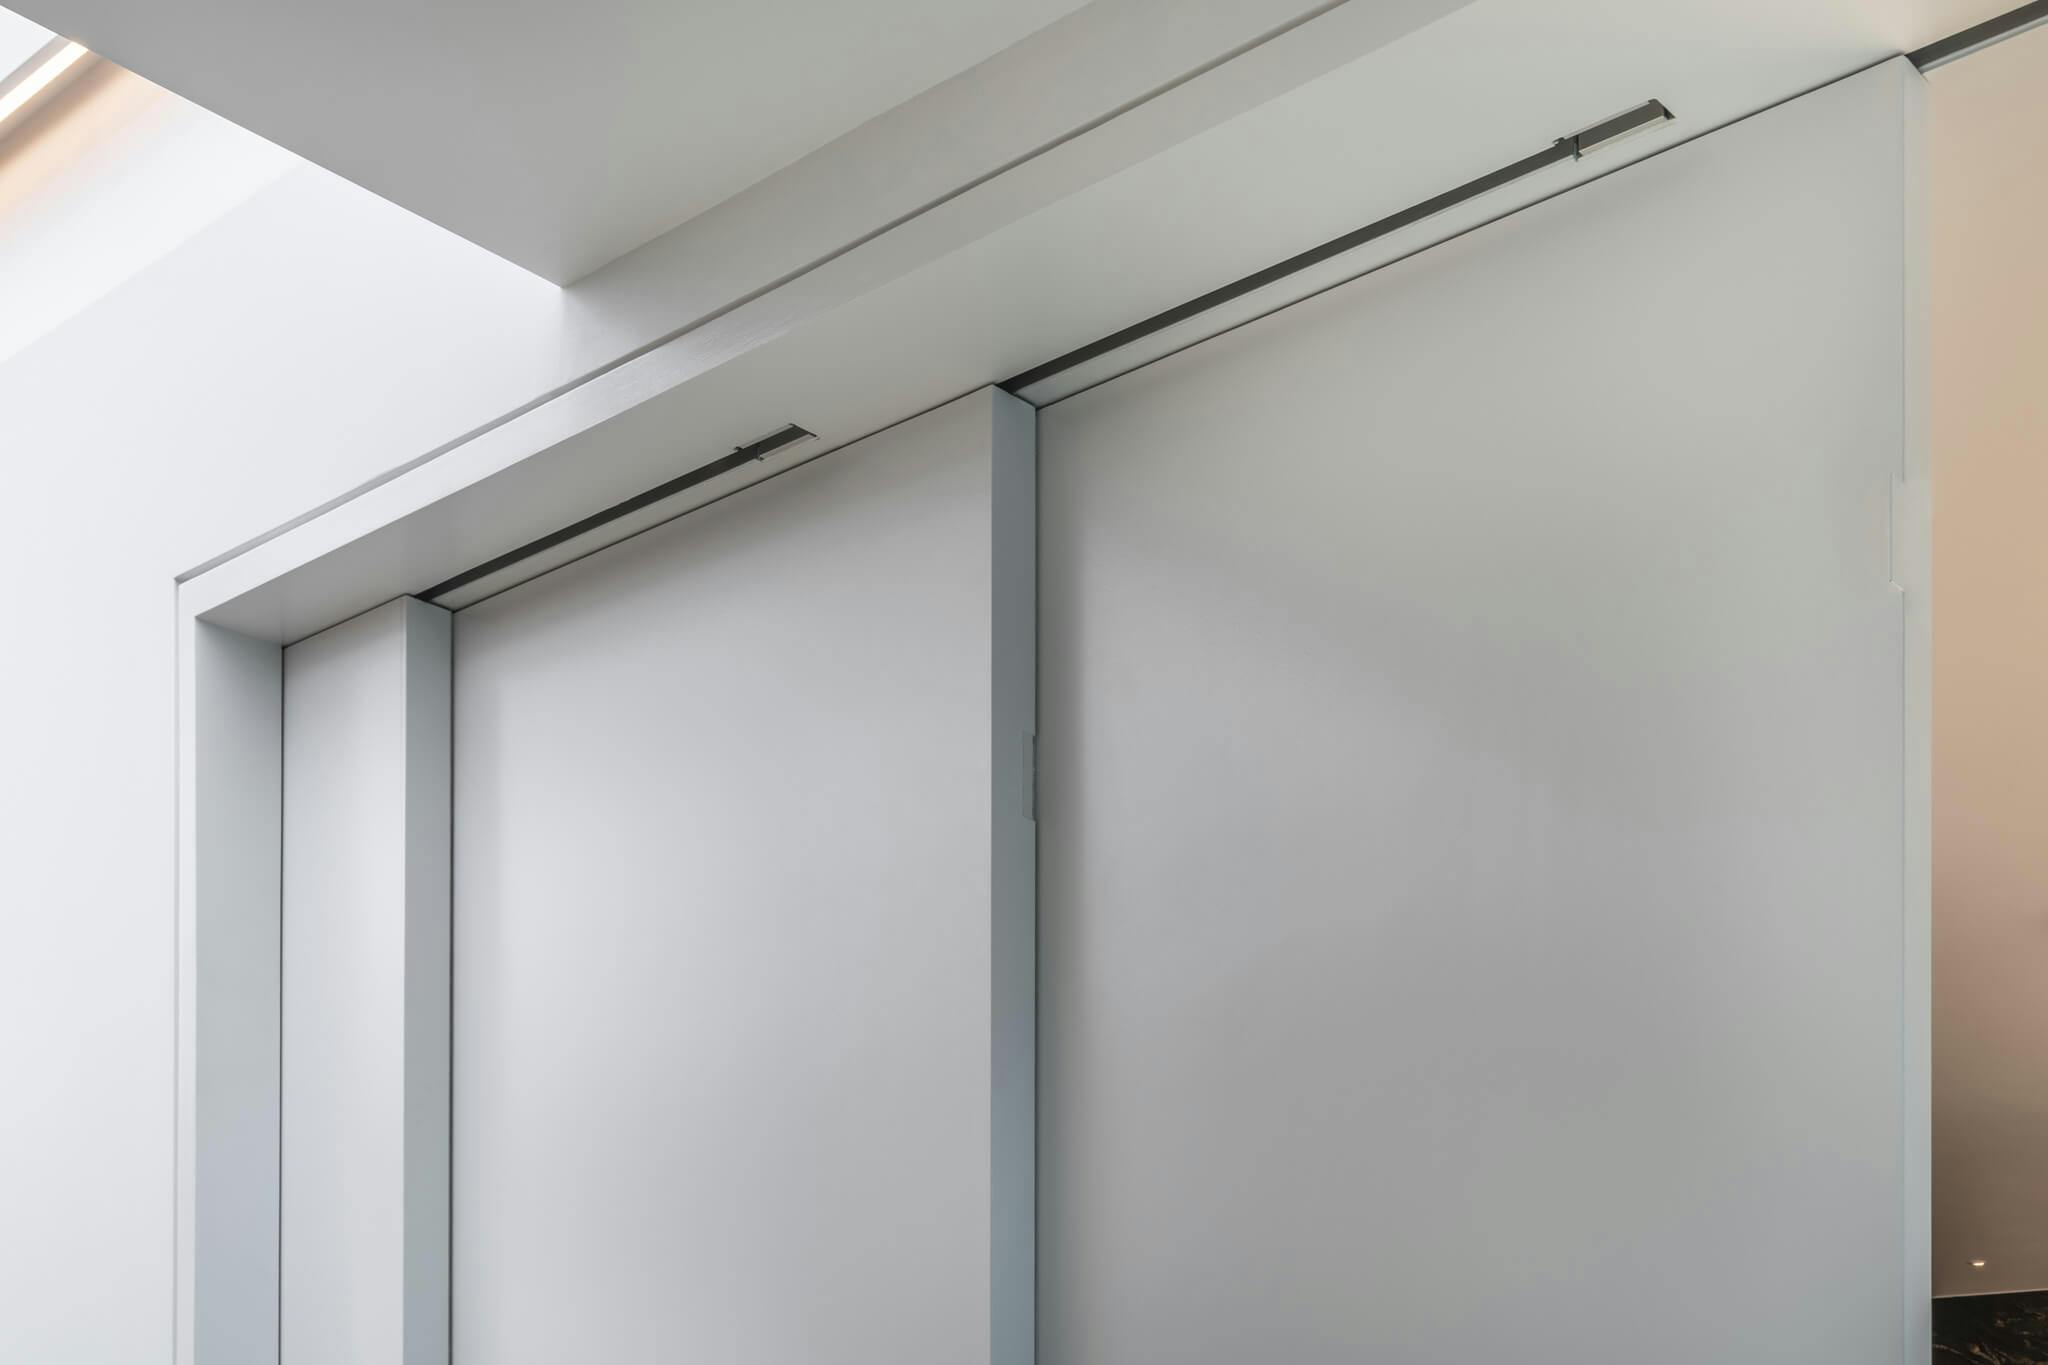 White telescopic sliding doors showing track detail that are slightly open showing the ceiling of the adjoining room.